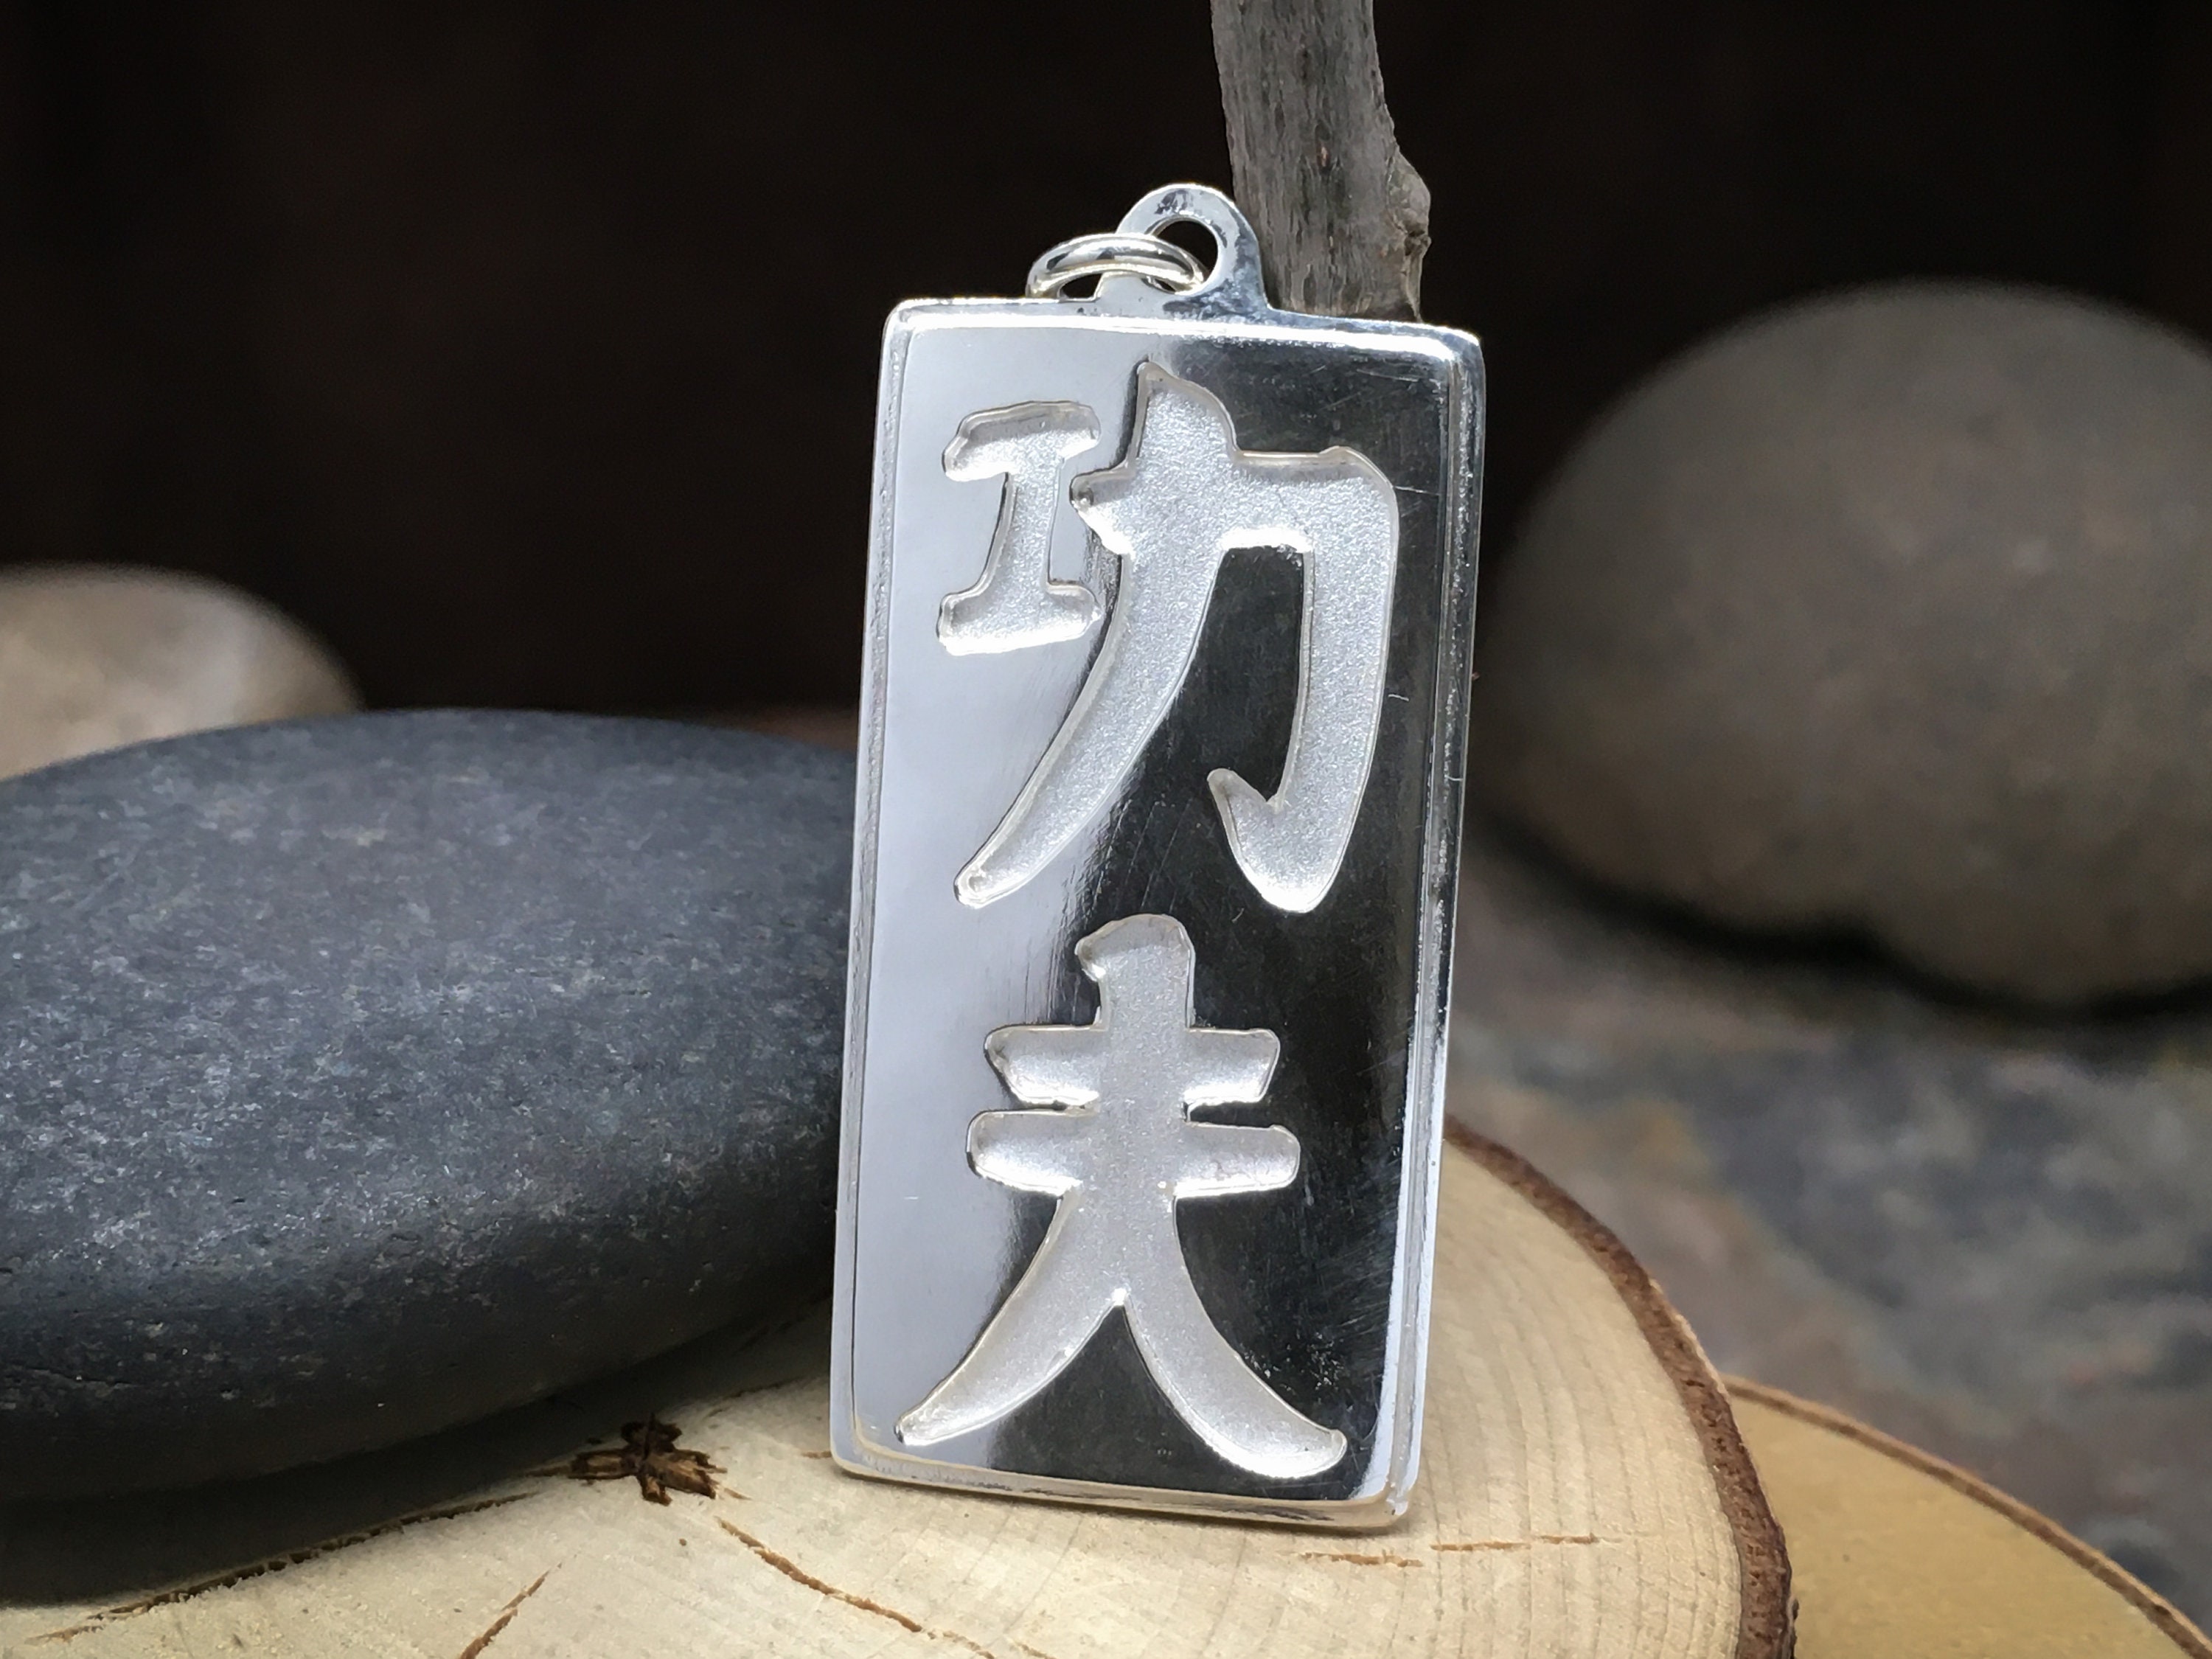 Kung Fu Pendant "Yin" in solid Sterling Silver on Leather Cord  - Fine jewelry gift for boyfriend, martial artist gift or birthday gift idea